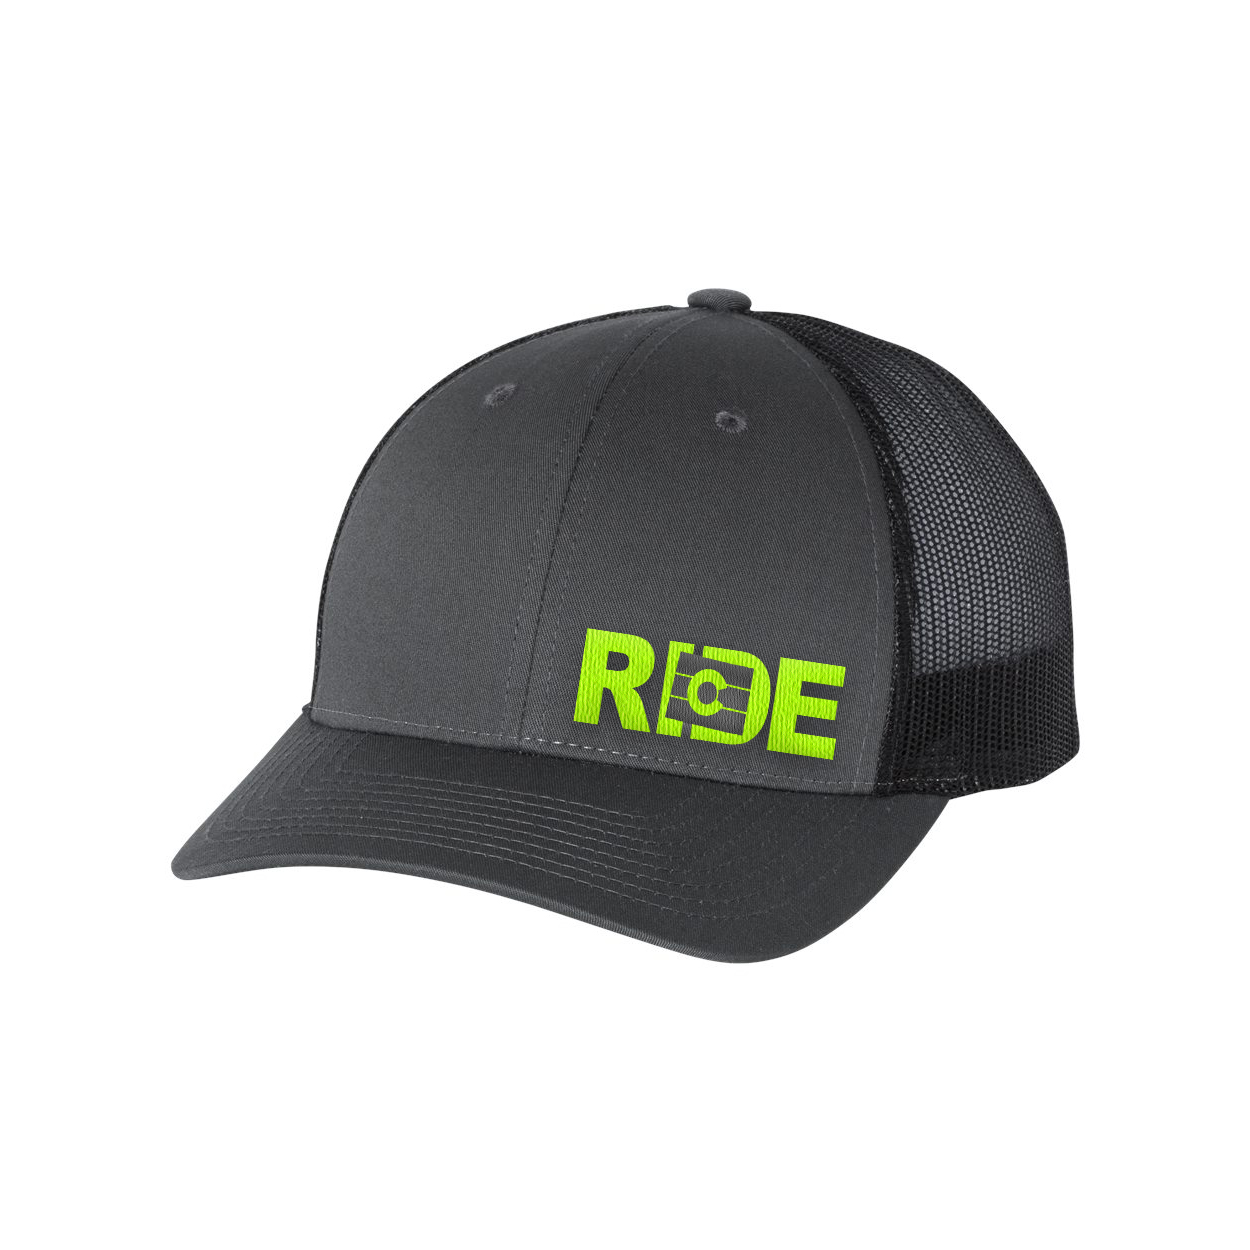 Ride Colorado Night Out Pro Embroidered Snapback Trucker Hat Gray/Black/Hi-Vis